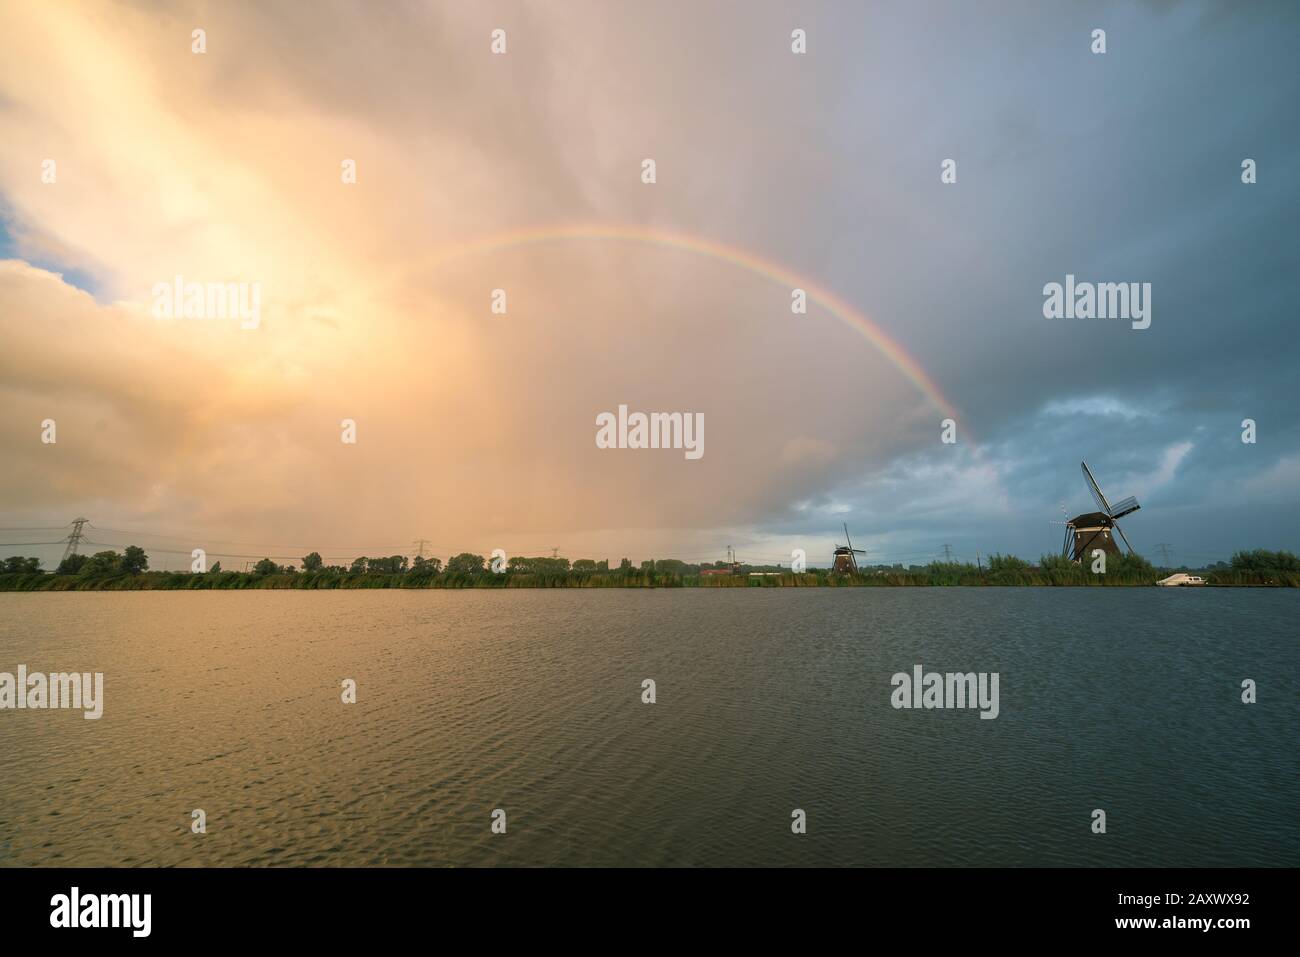 Bright rainbow over a lake with windmill standing at the shore Stock Photo